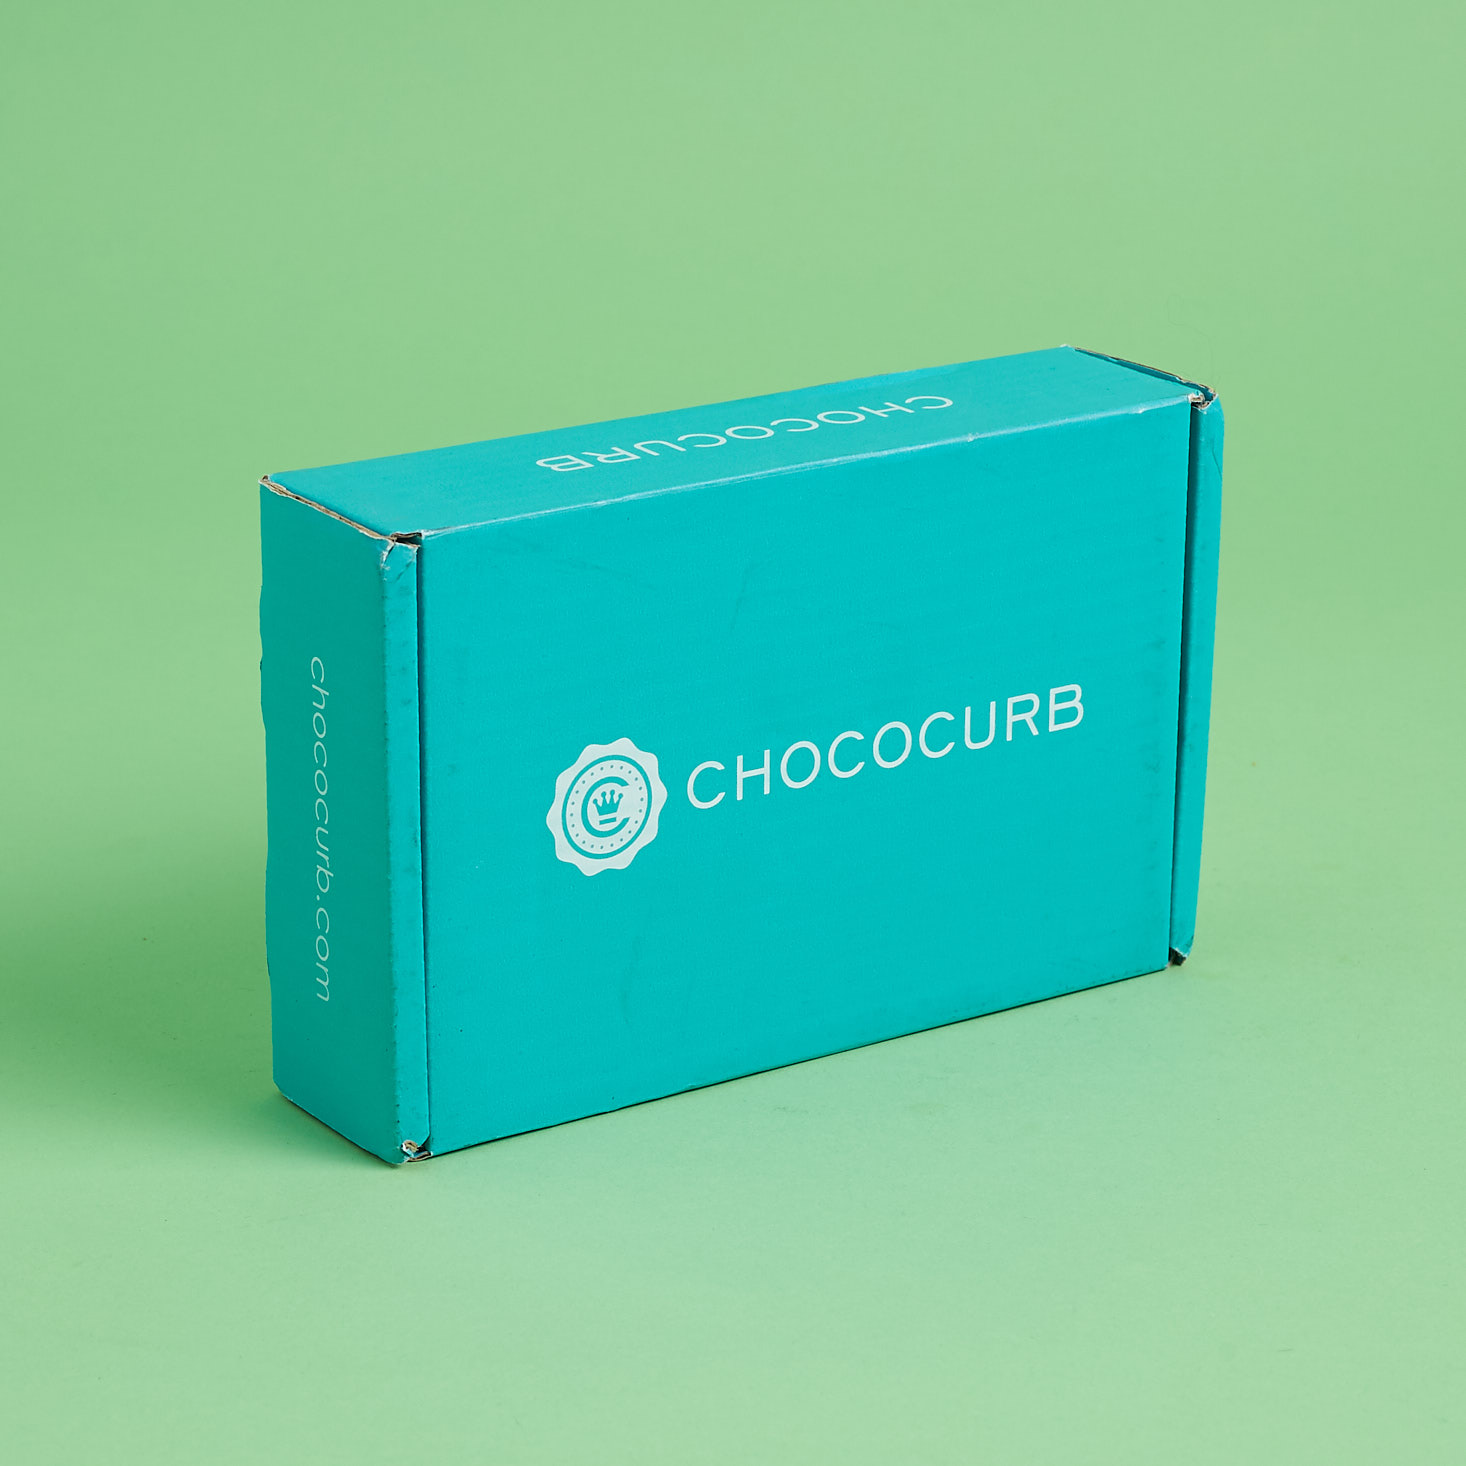 Chococurb Classic Box Review + Coupon – January 2018